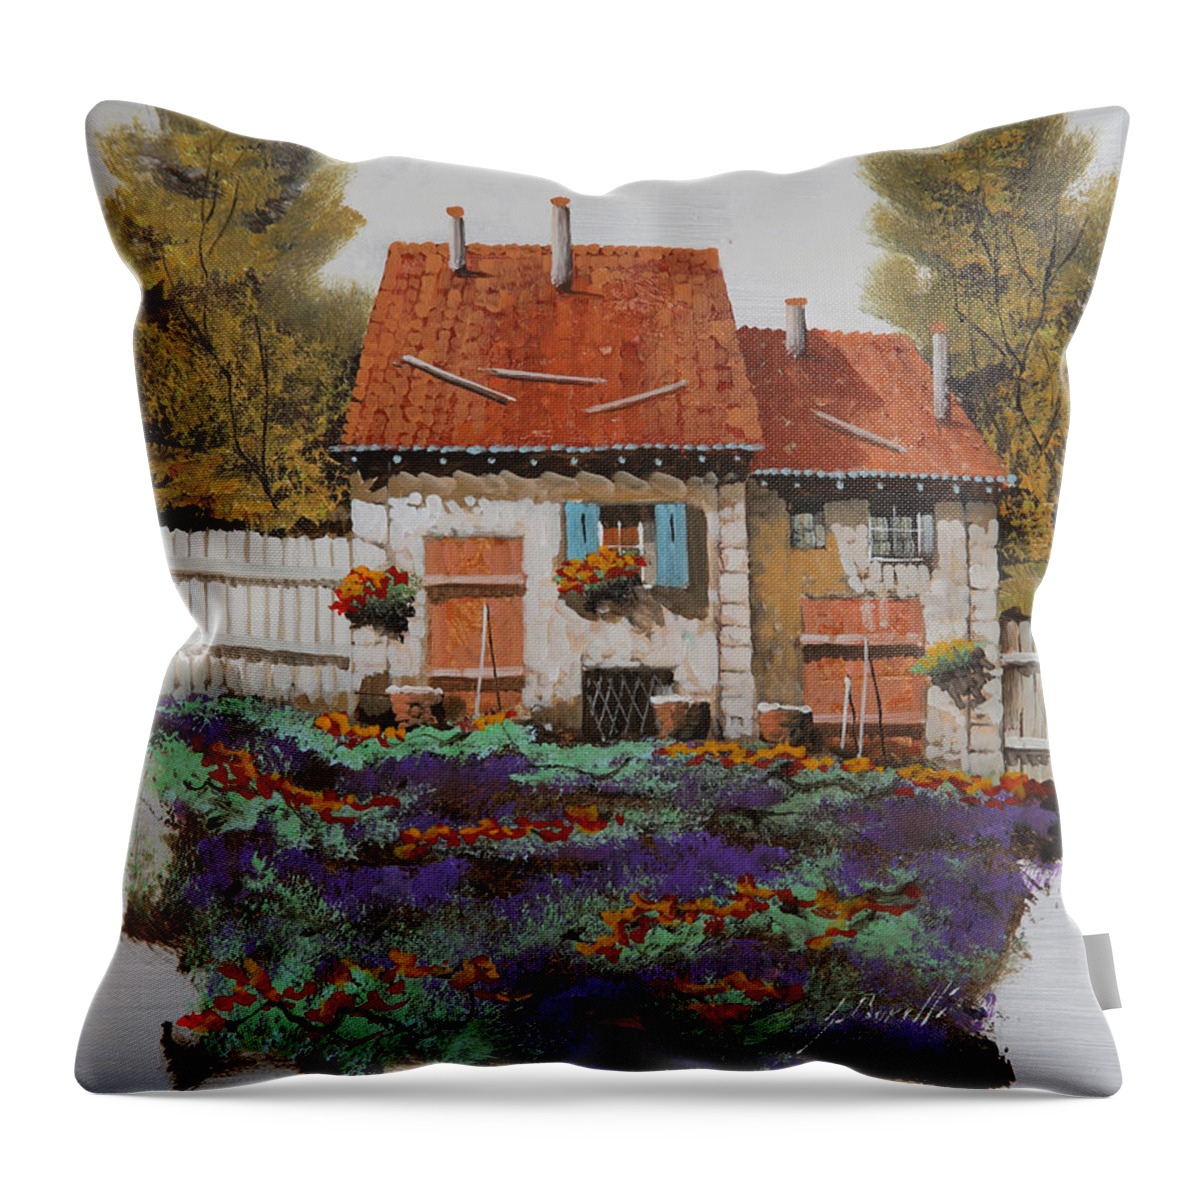 Country House Throw Pillow featuring the painting Case E Lavande by Guido Borelli